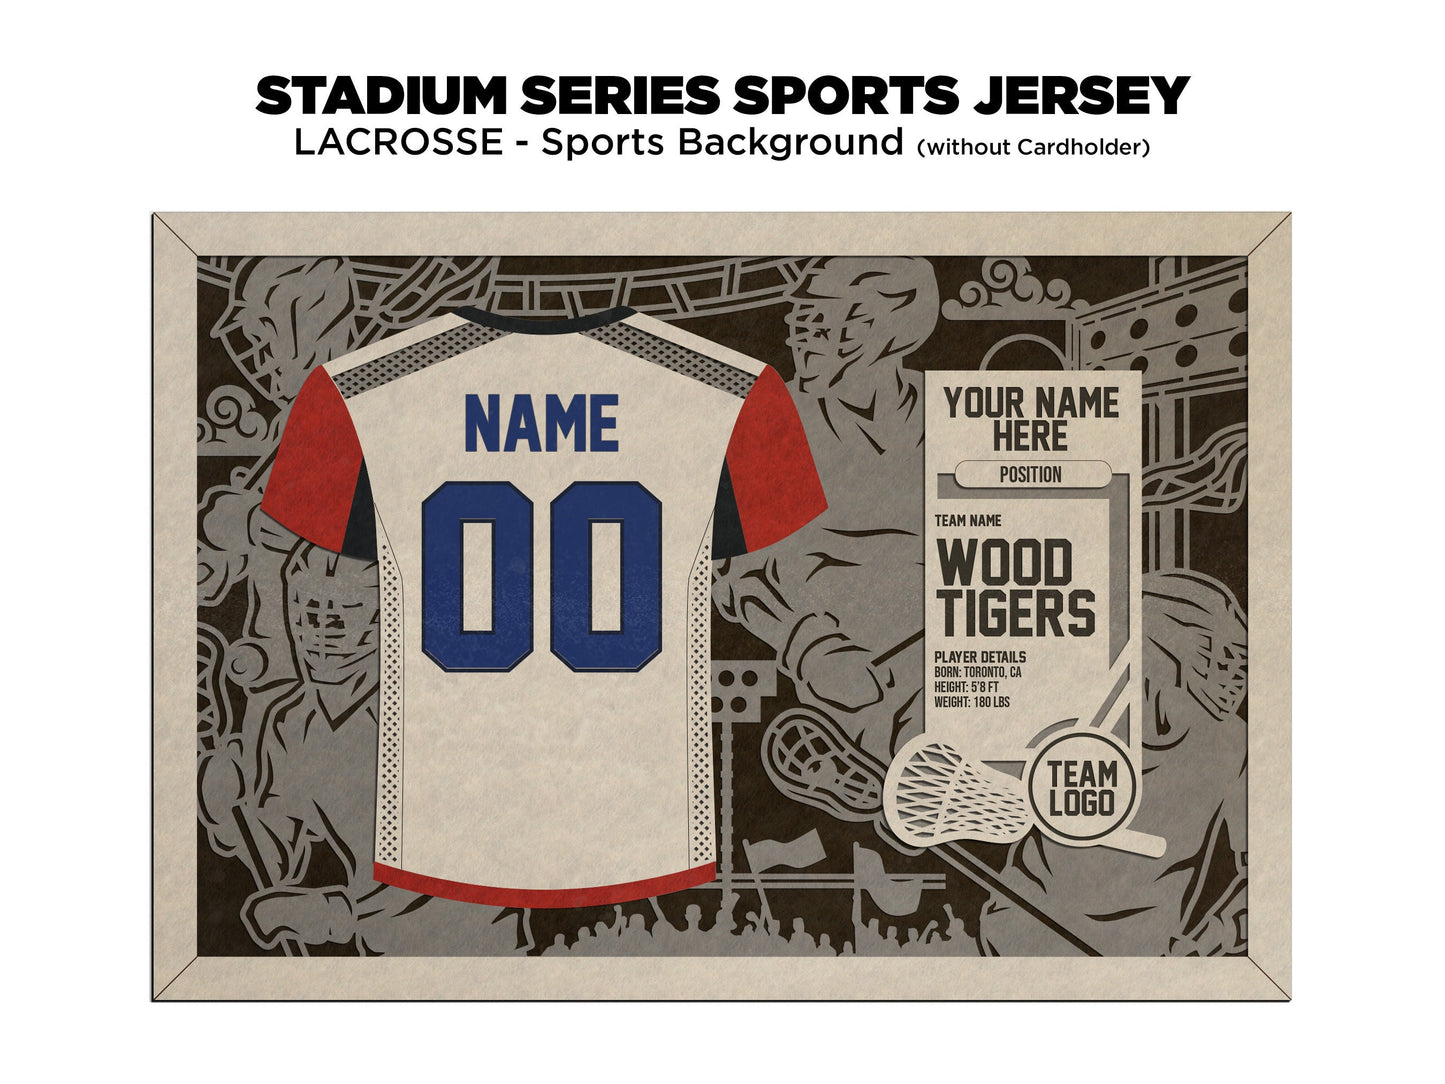 Stadium Series Jerseys - Lacrosse - 3 Variations - Male, Female & Alternate Backgrounds - SVG File Download - Sized for Glowforge